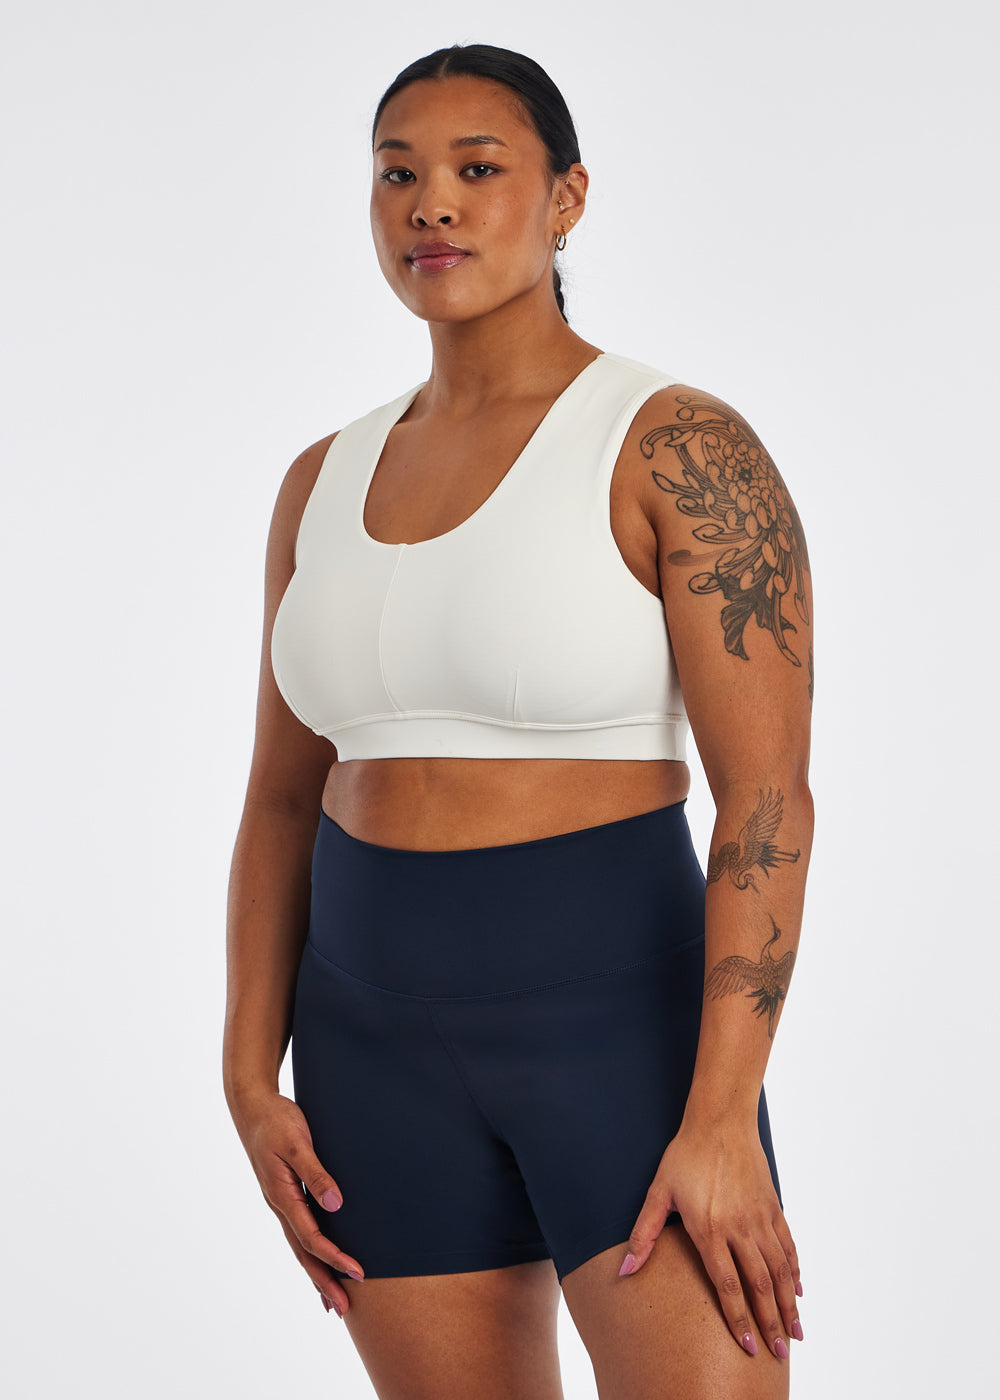 Large Cup and Plus Size Sports Bra Reviews 